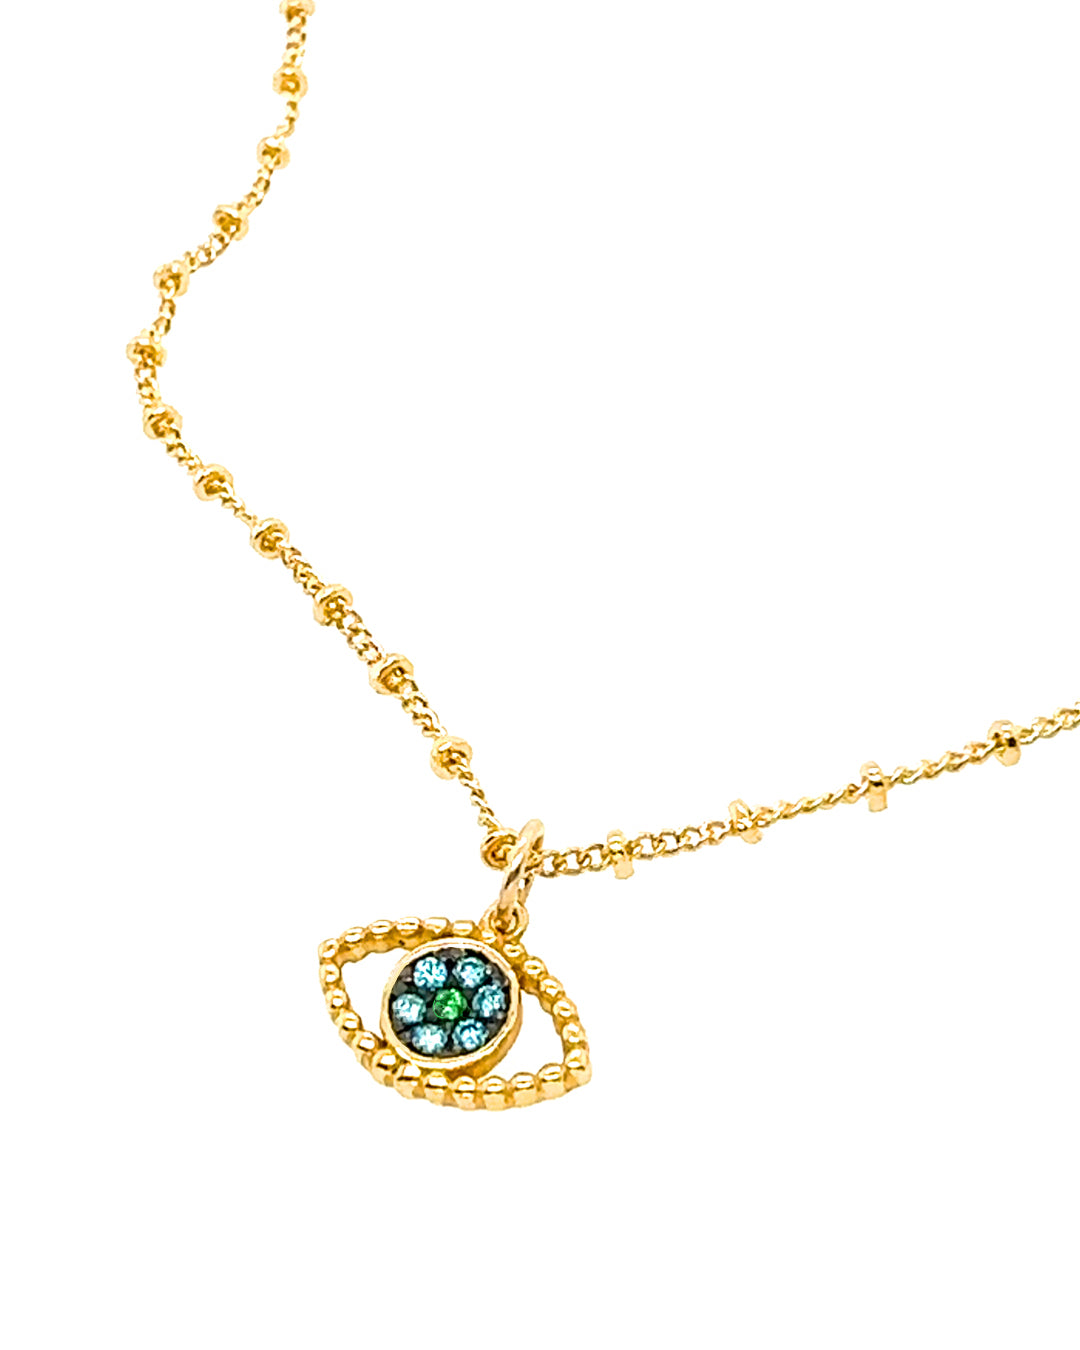 Gold fill evil eye talisman protection necklace chain